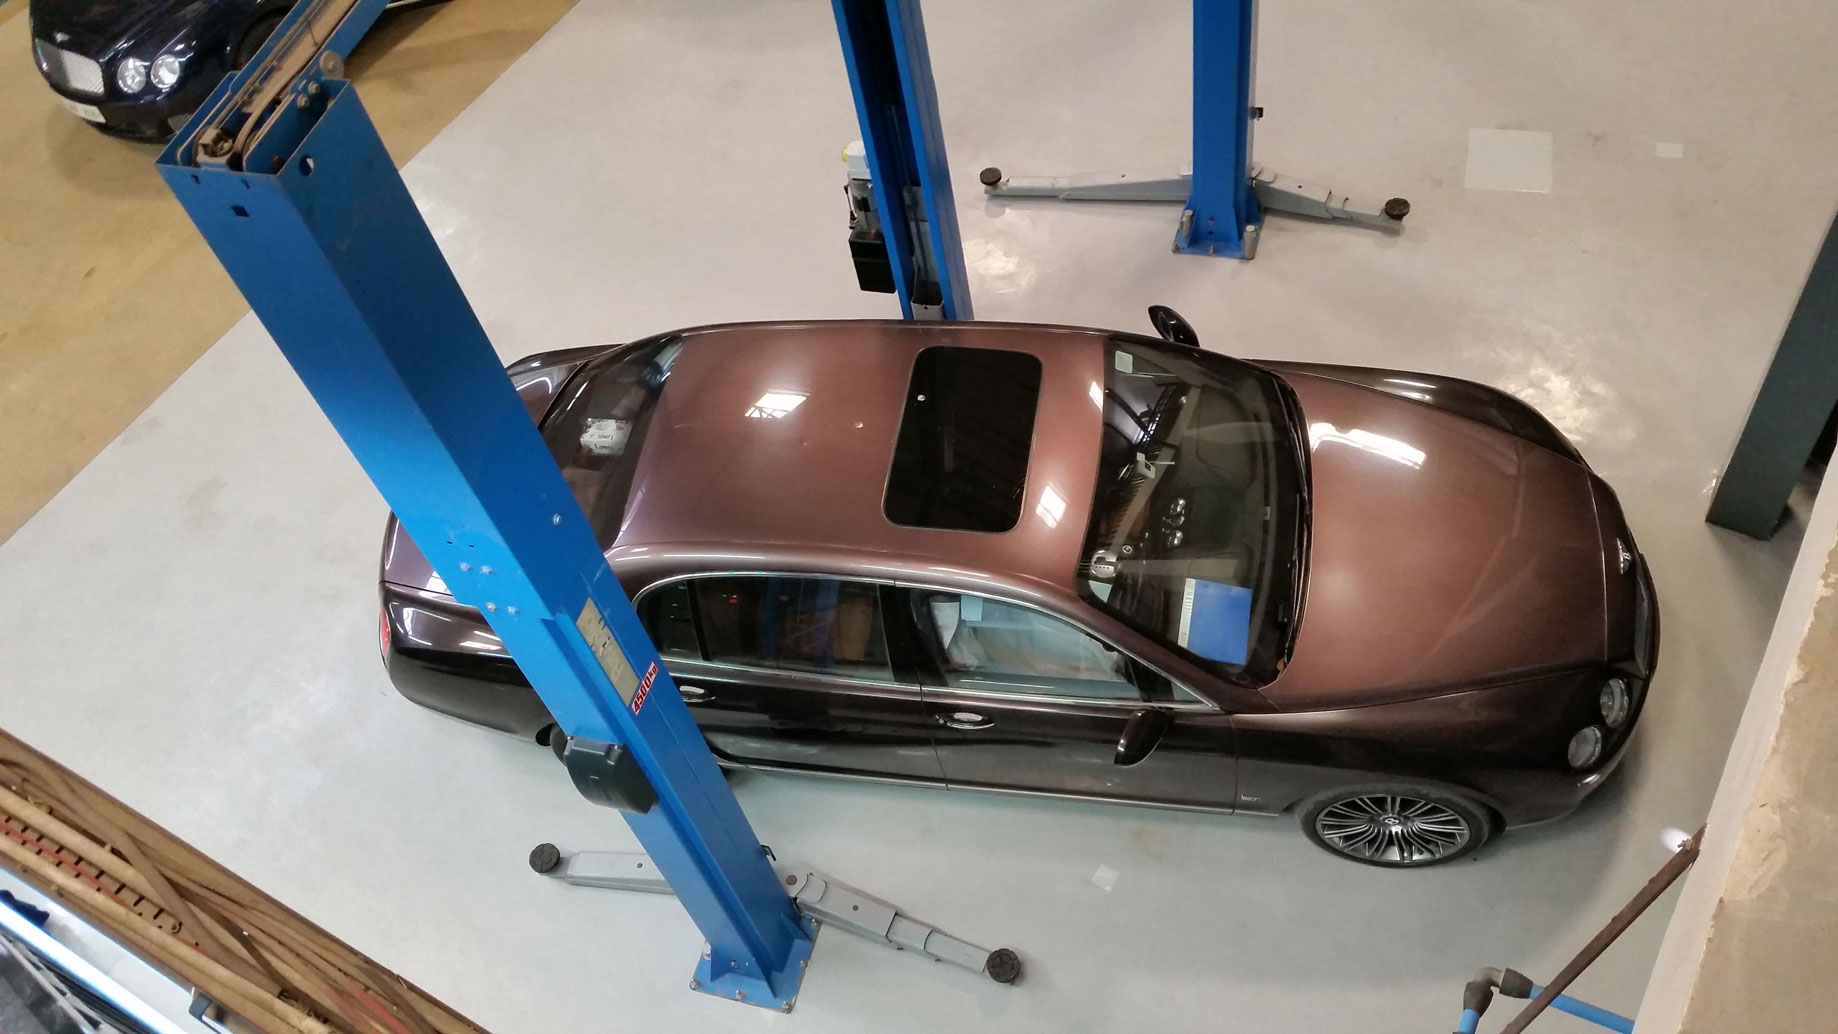 Top view of a brown car being serviced in a workshop